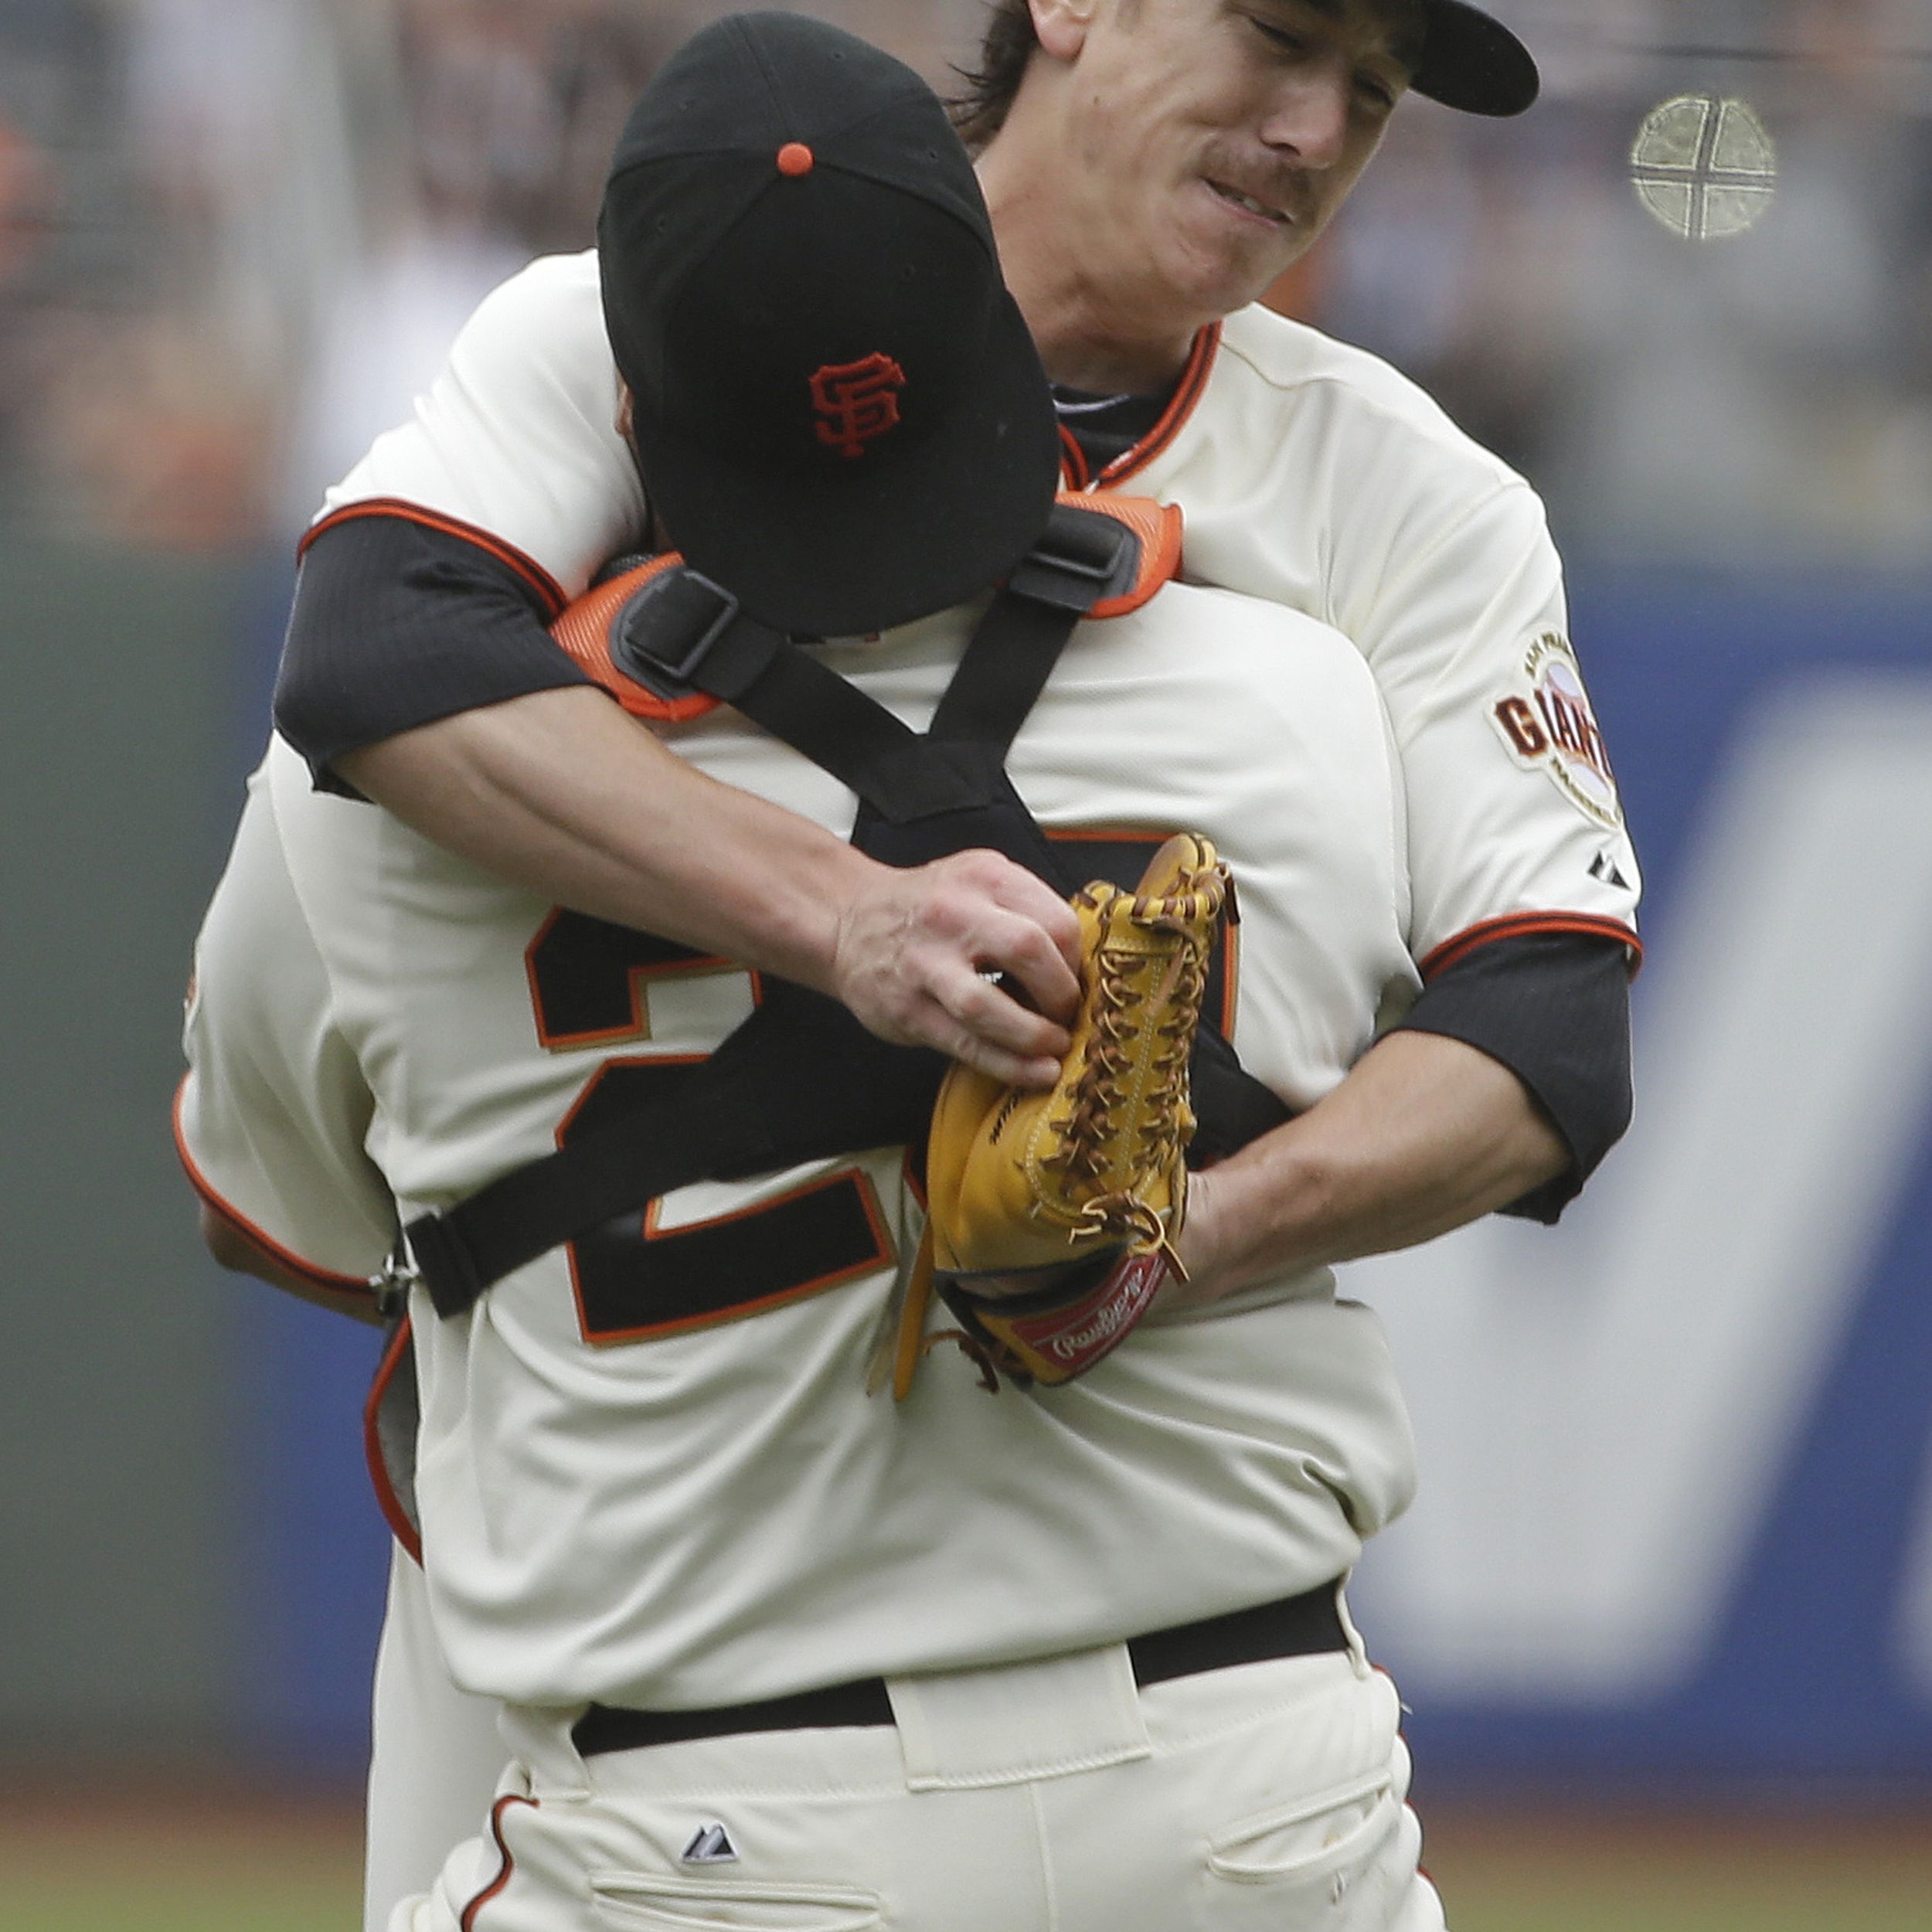 Tim Lincecum has daddy issues. Let's make him a character on 'Lost